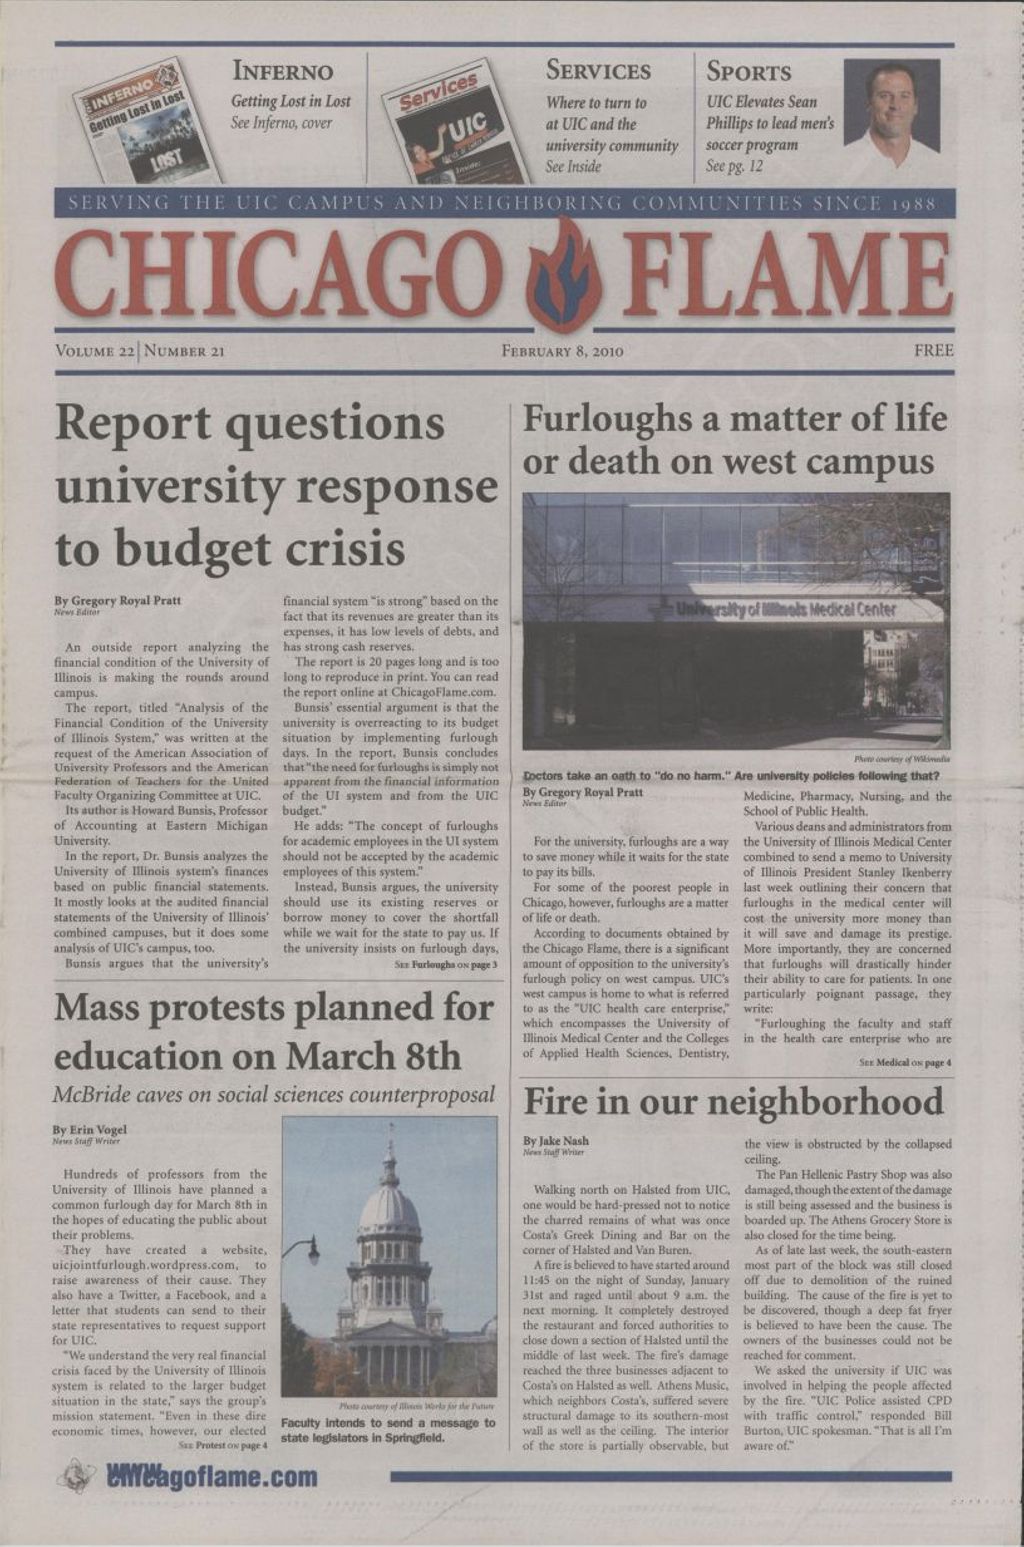 Miniature of Chicago Flame (February 8, 2010)